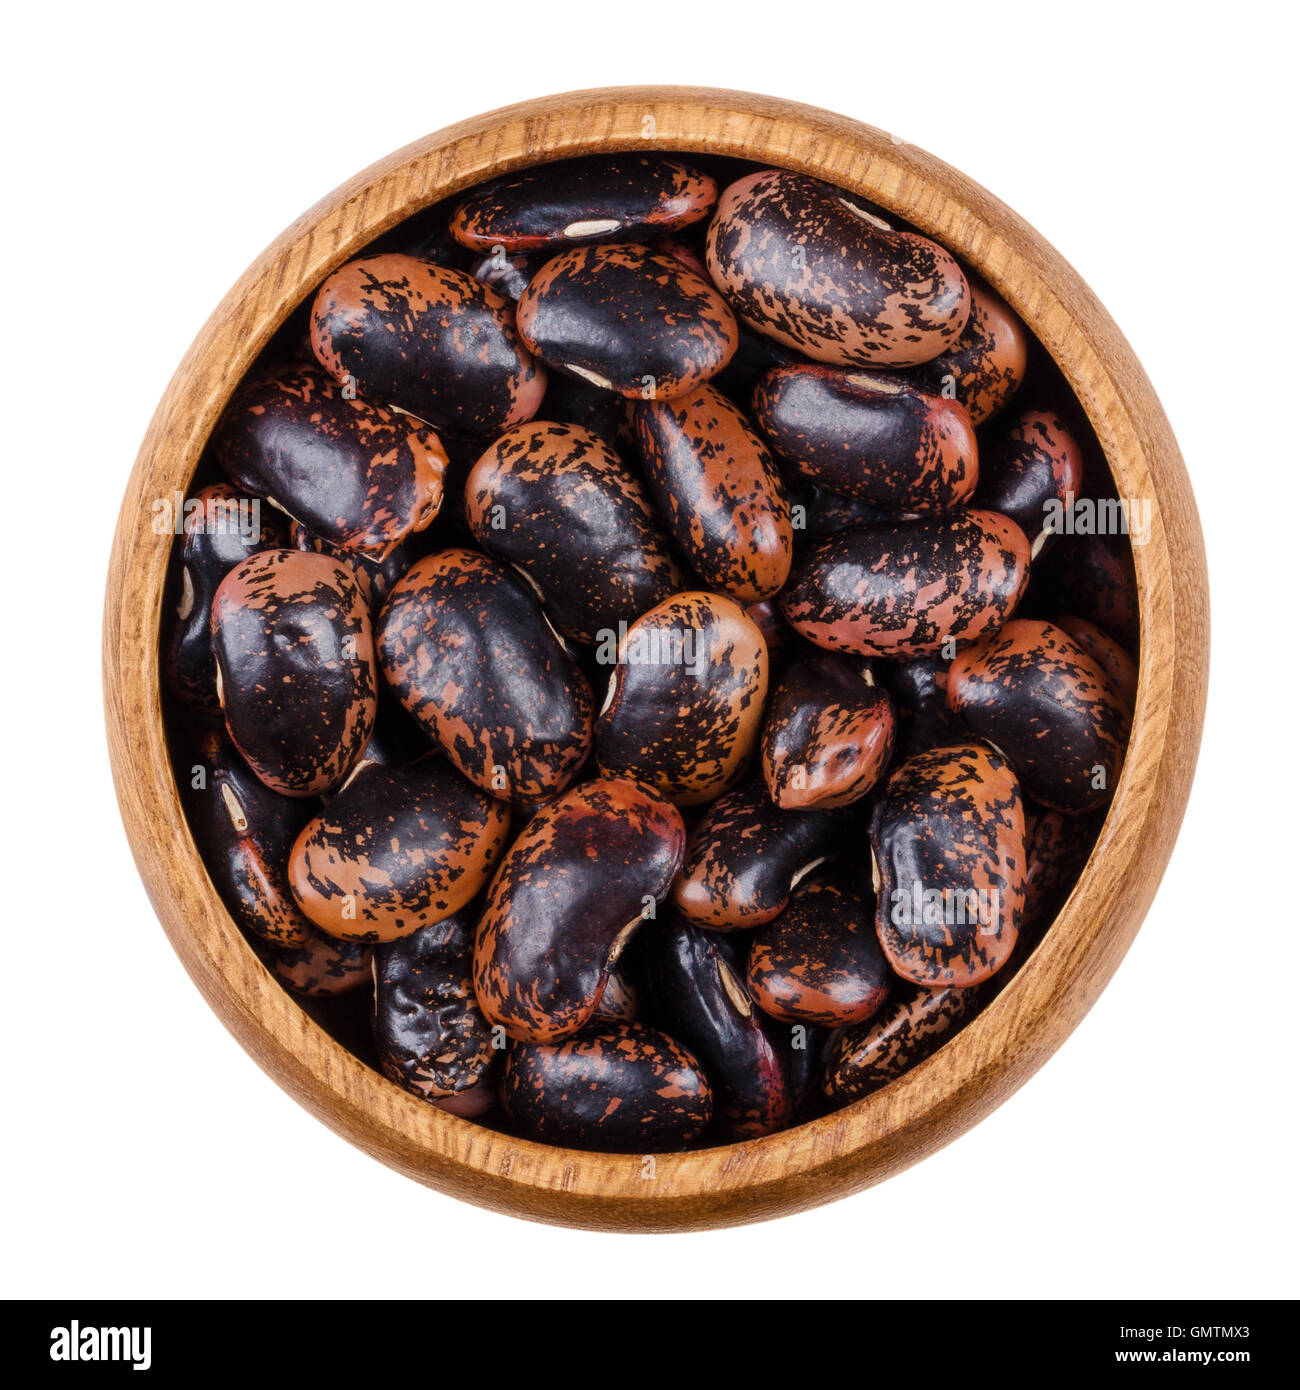 Black speckled kidney beans in a wooden bowl over white. Variety of common beans, Phaseolus vulgaris. Dried seeds. Stock Photo